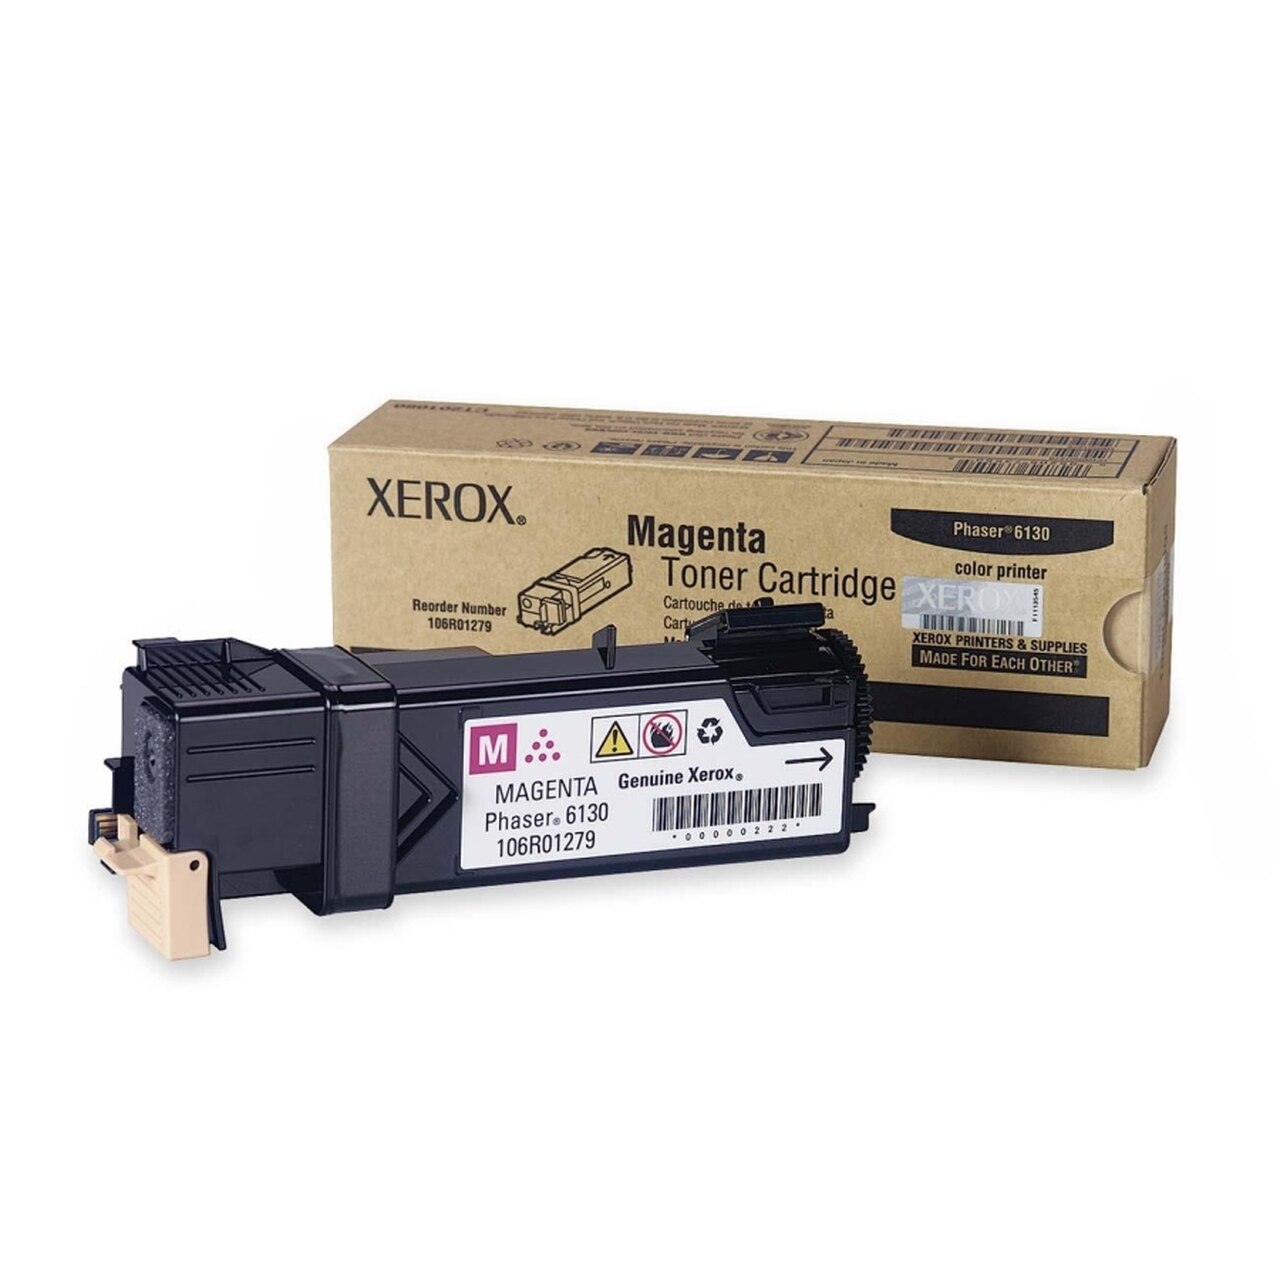 Xerox Phaser 6130 Driver Download Mac